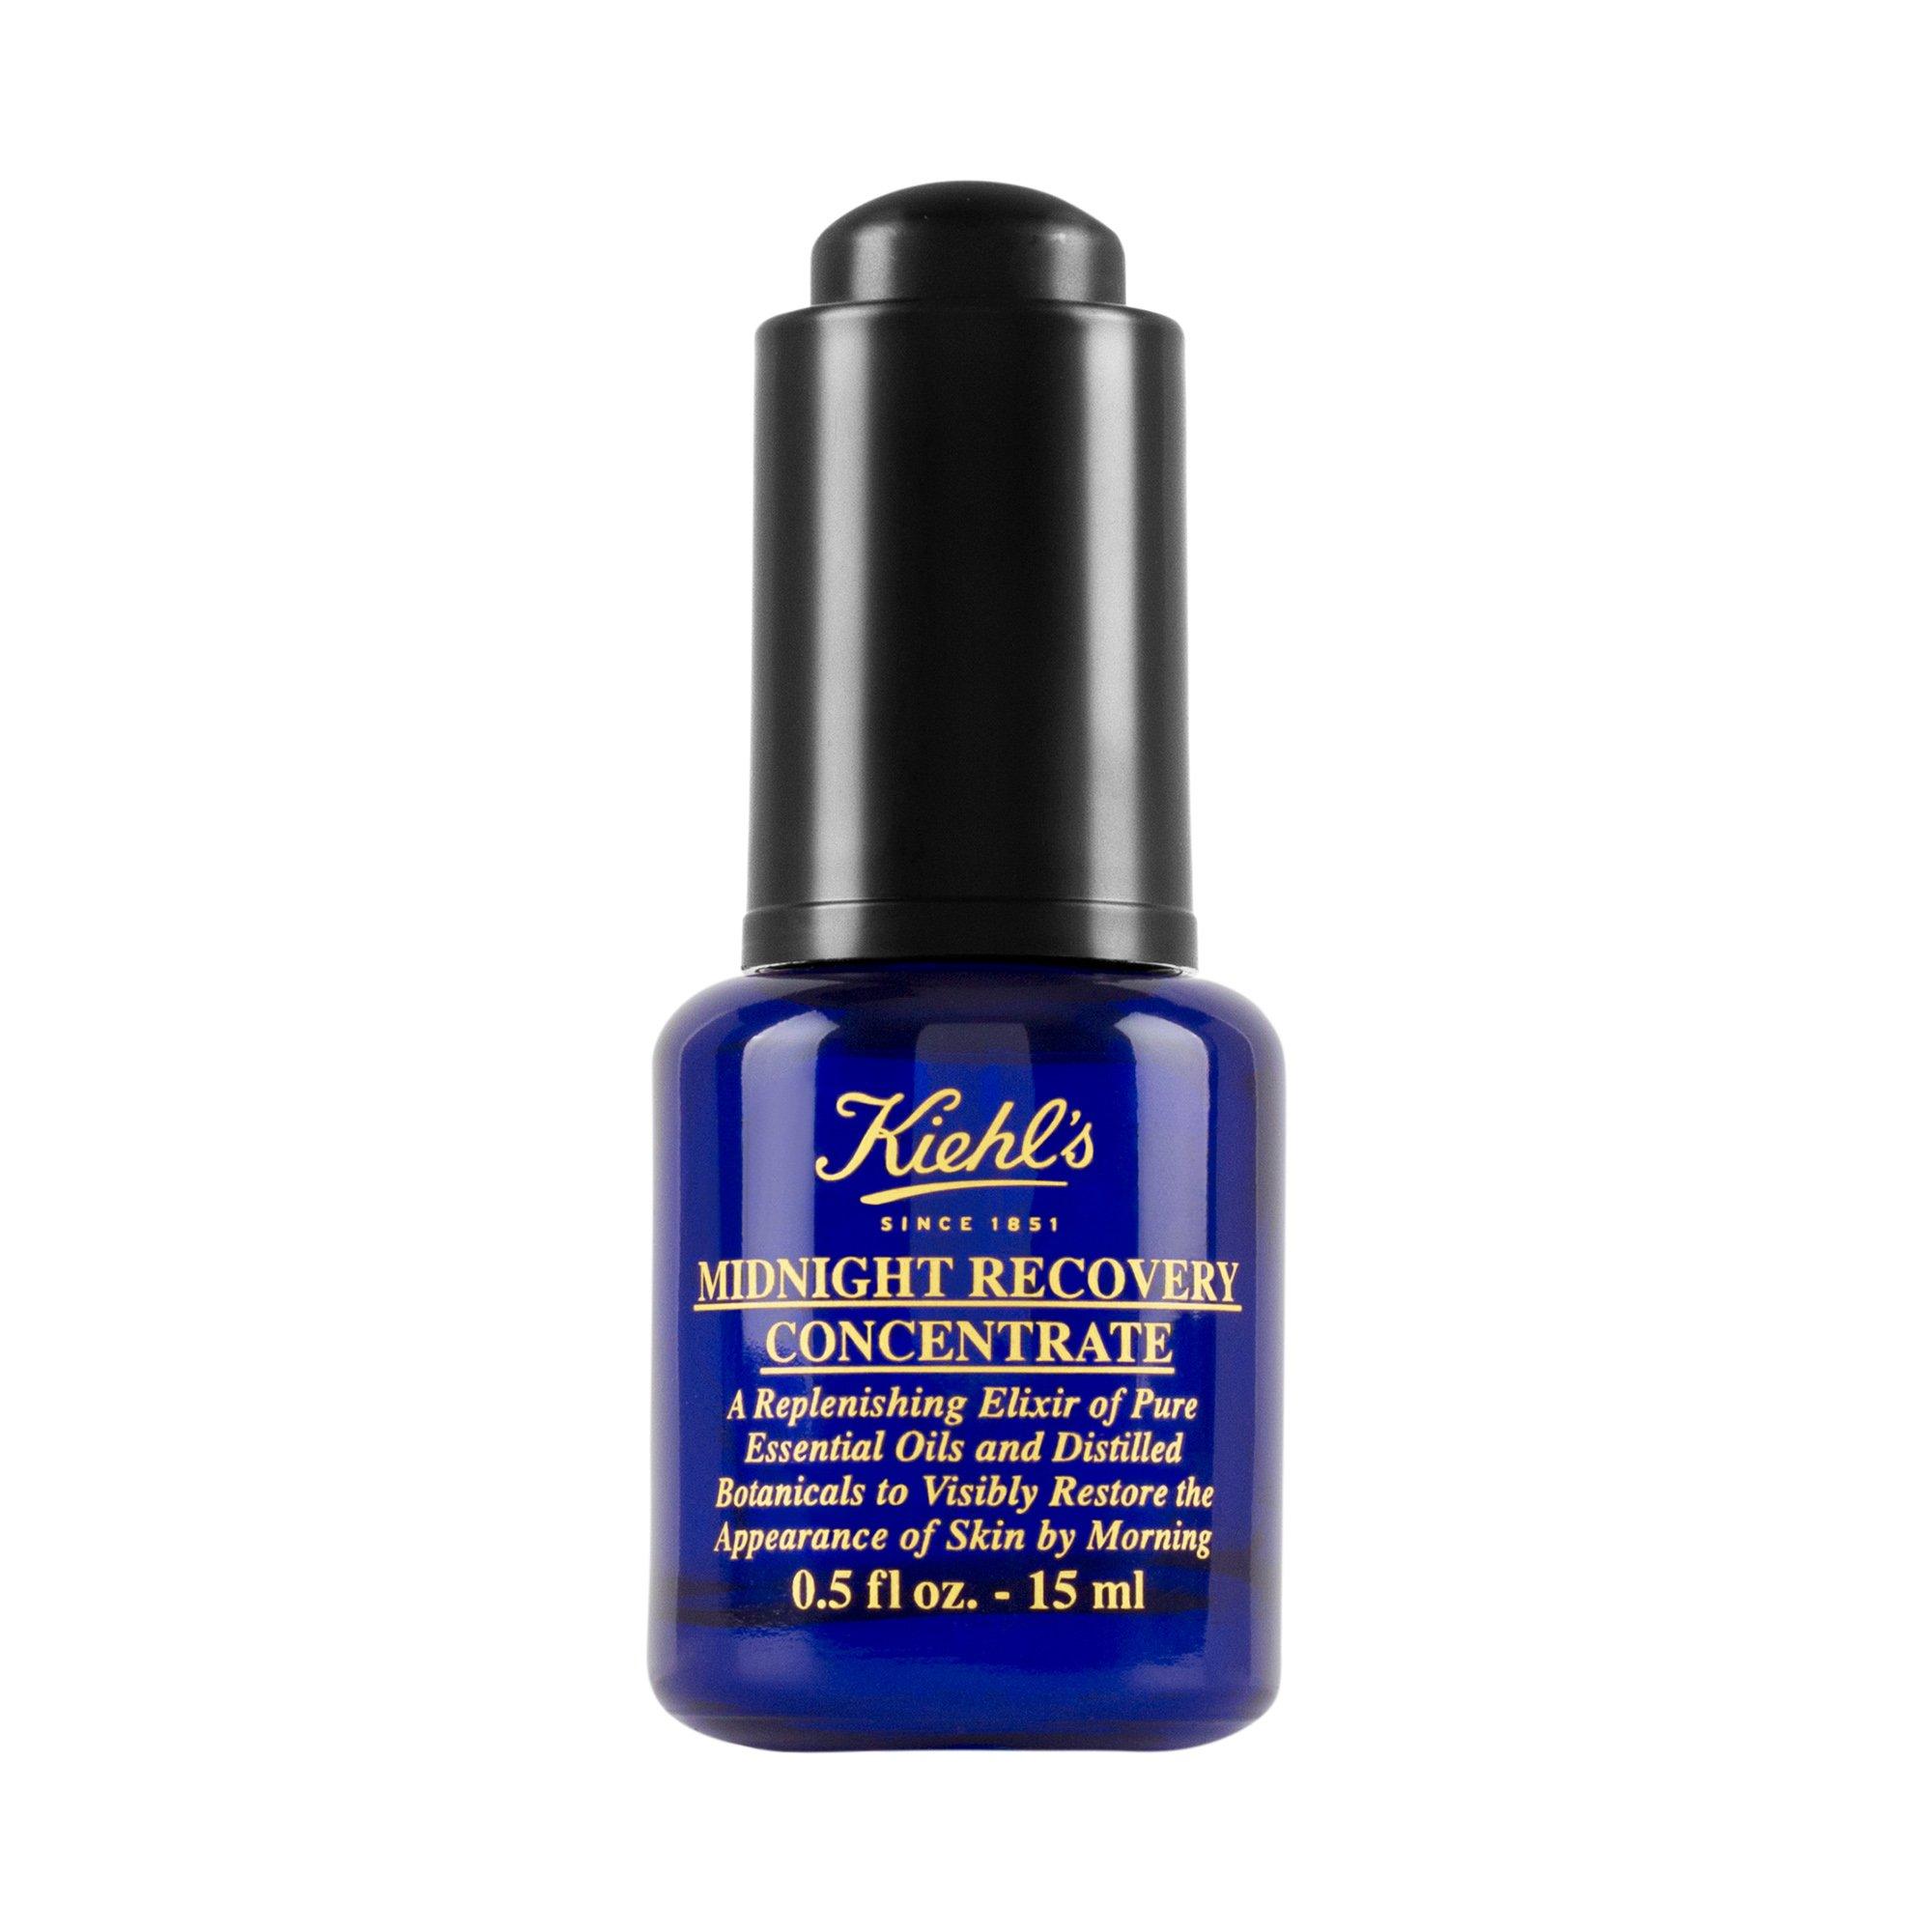 Image of Kiehl's Midnight Recovery Concentrate - 15ml